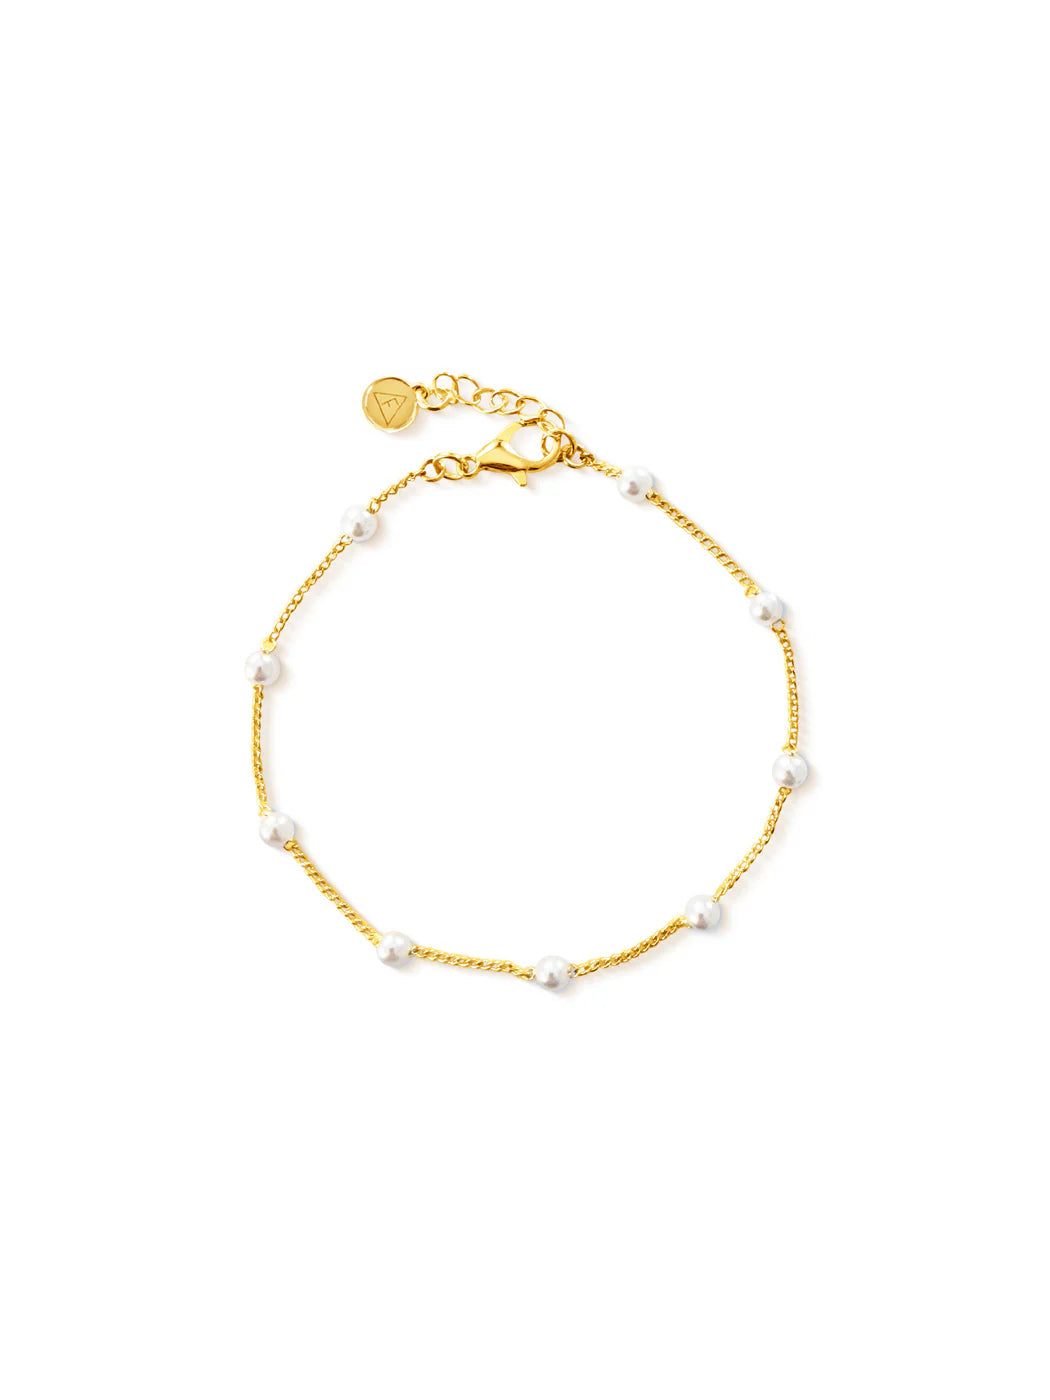 Gaia Pearl Chain Bracelet - Gold Plating